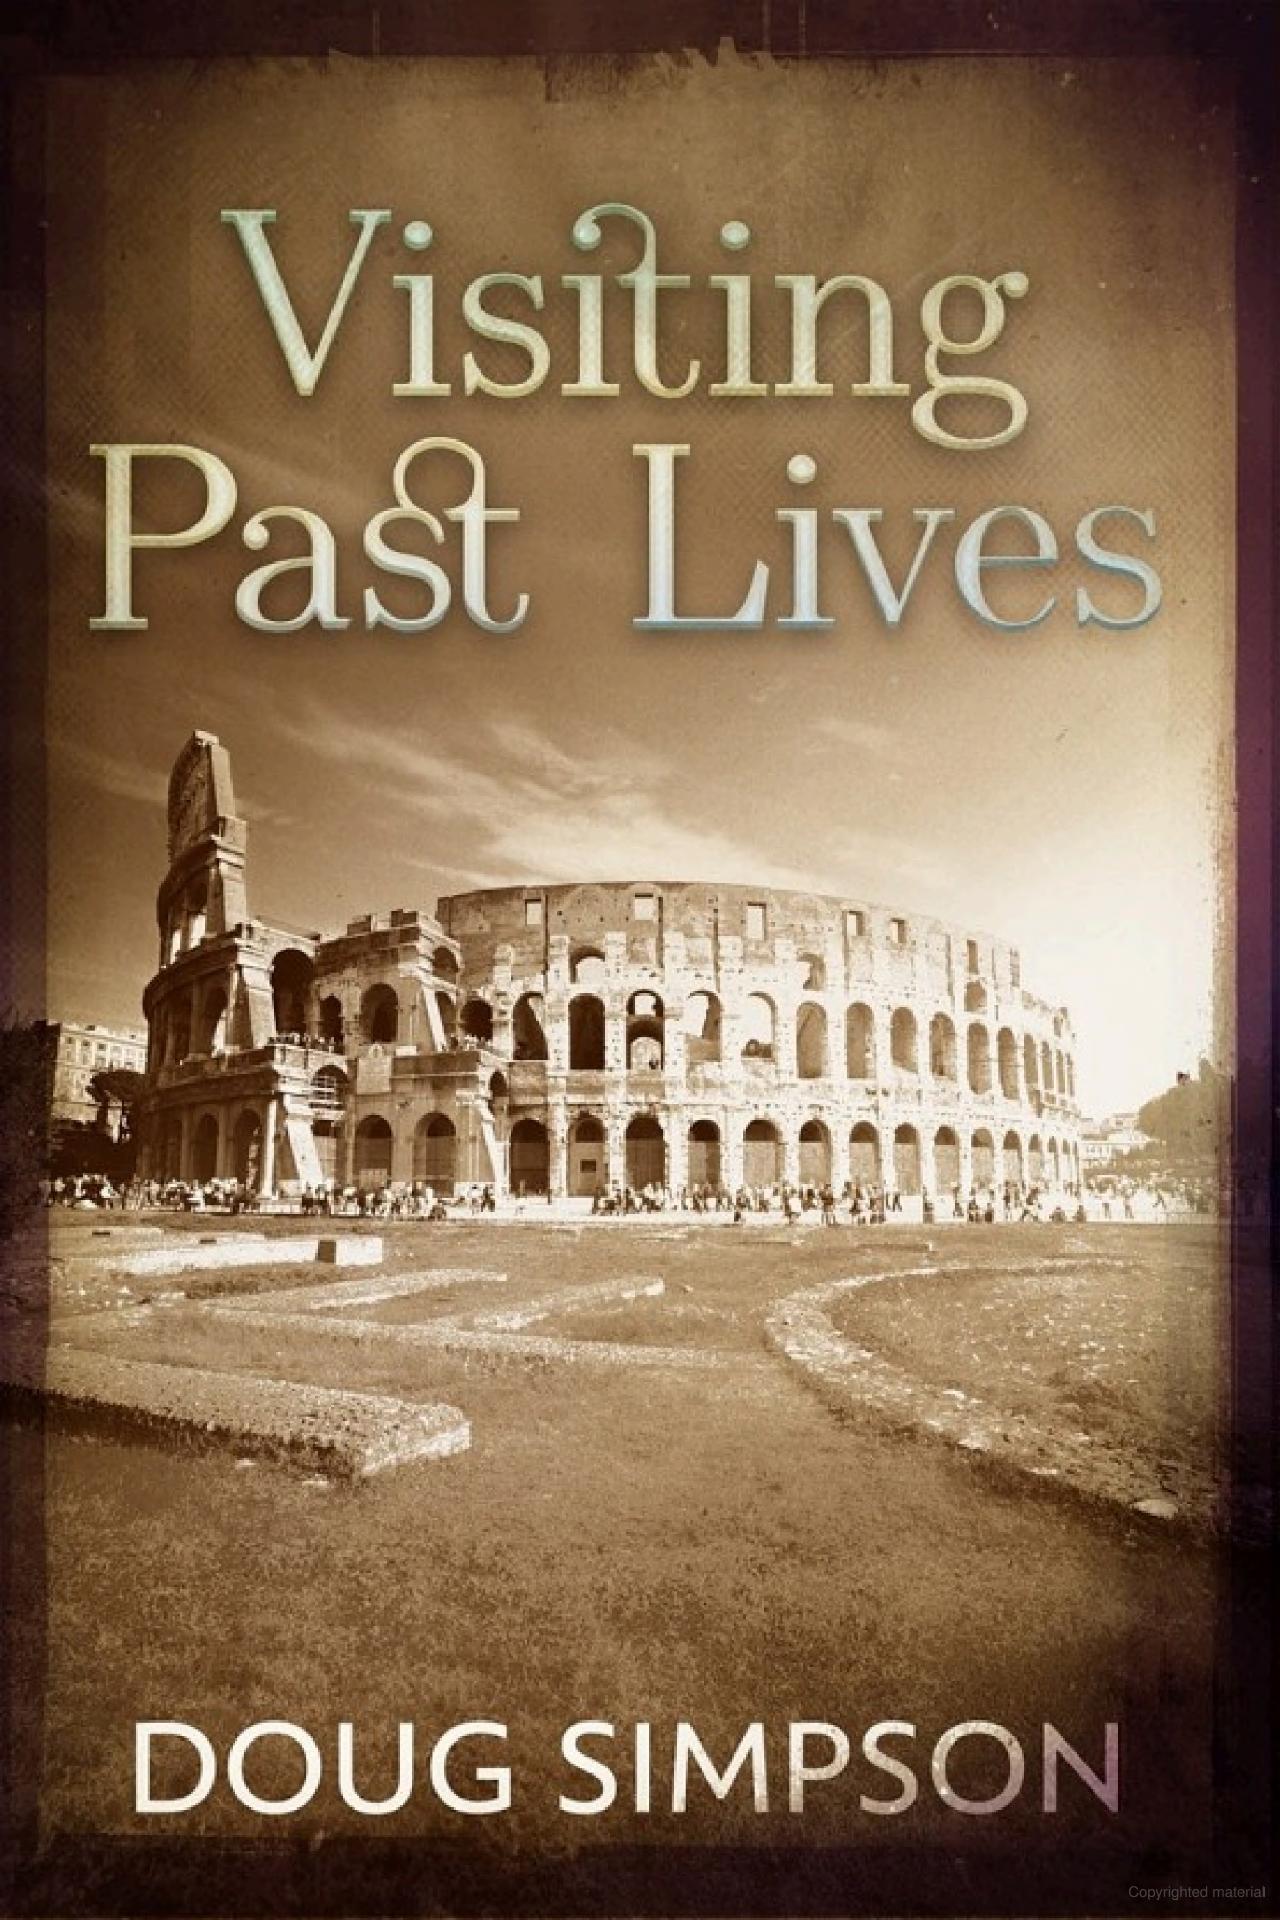 Visiting Past Lives by Doug Simpson